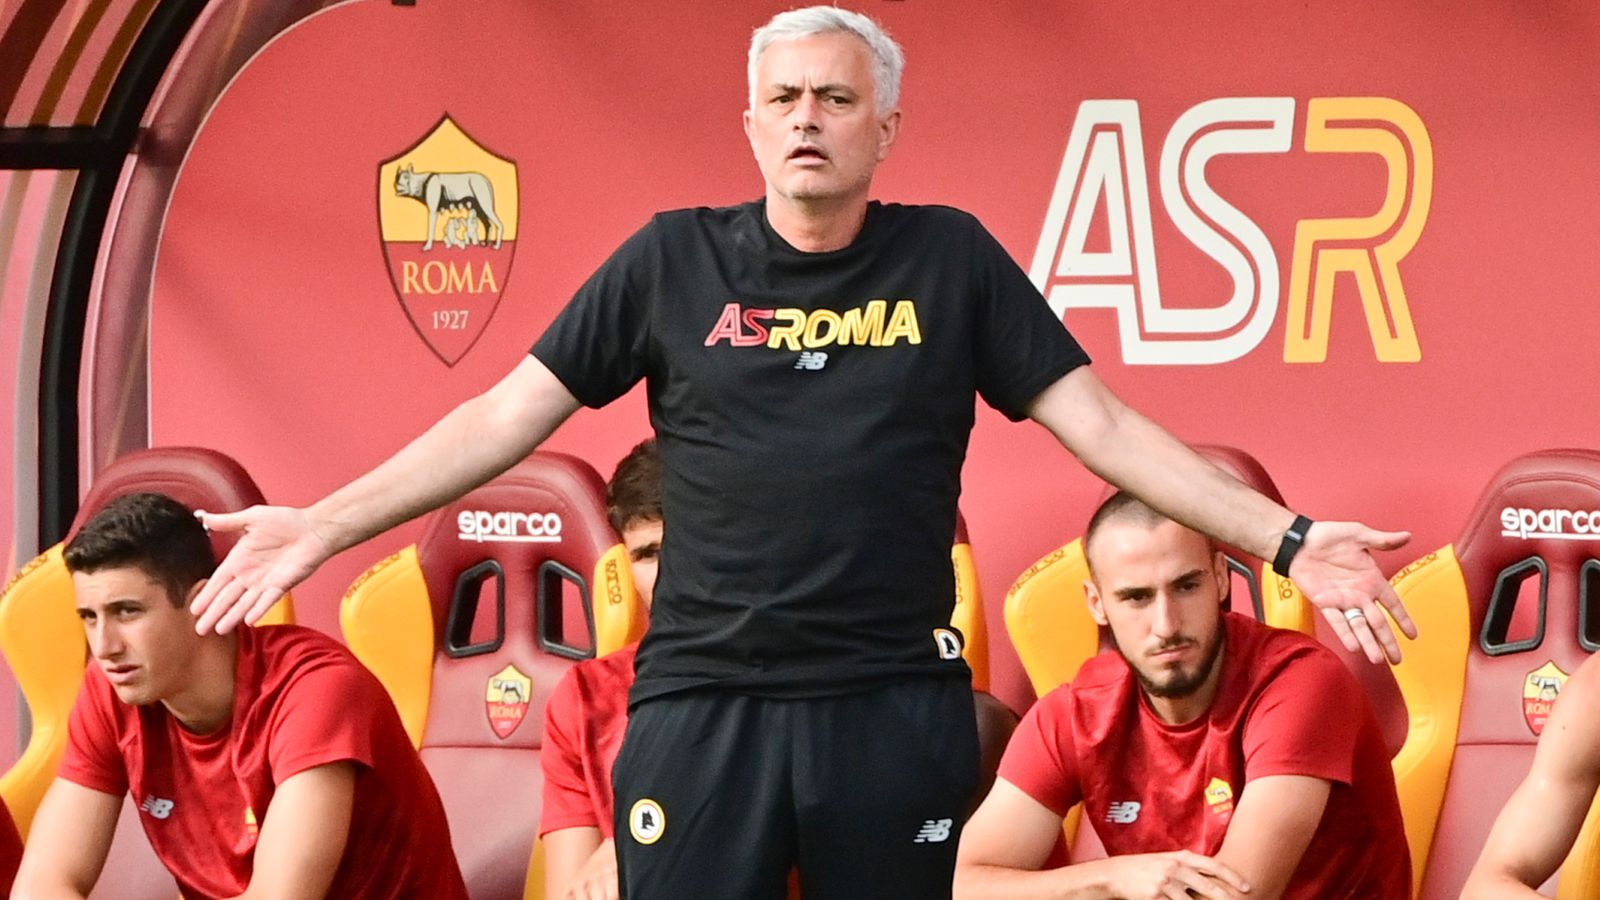 Jose Mourinho has transformed AS Roma into the Brazil of 1970 right before our very eyes